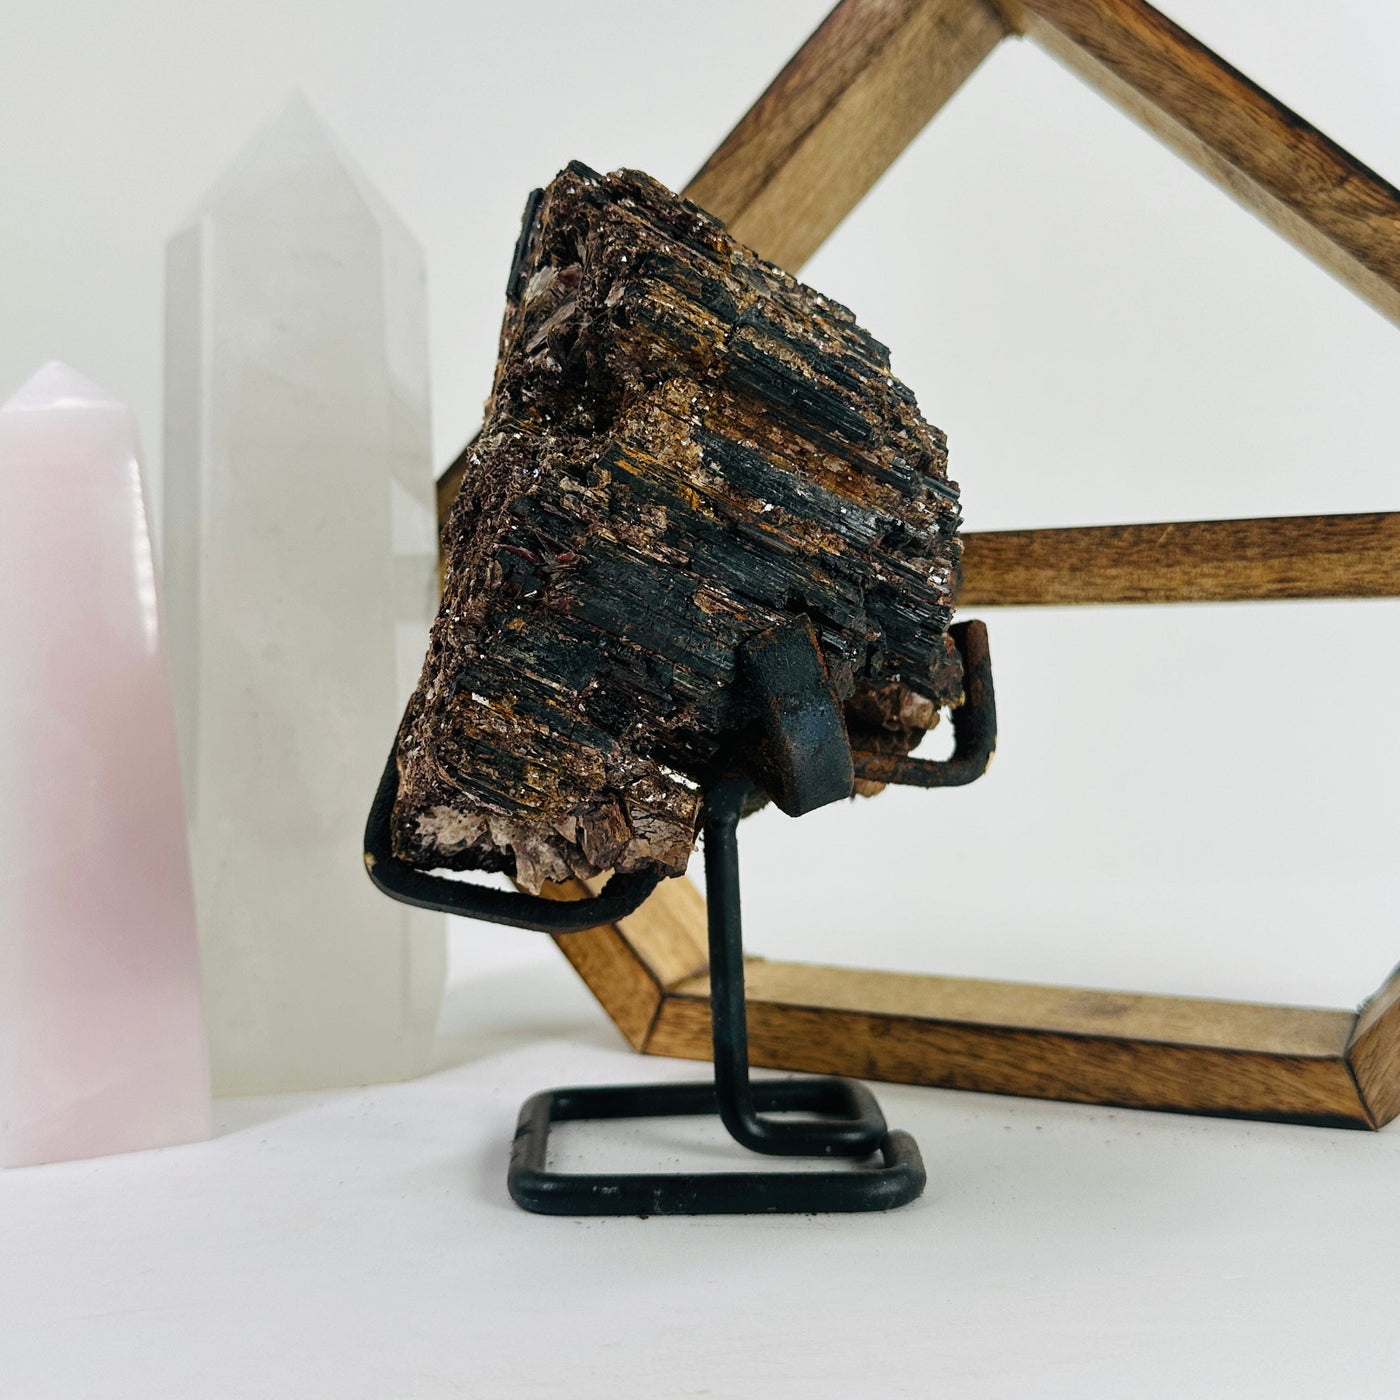 Tourmaline with mica on Metal stand with decorations in the background 